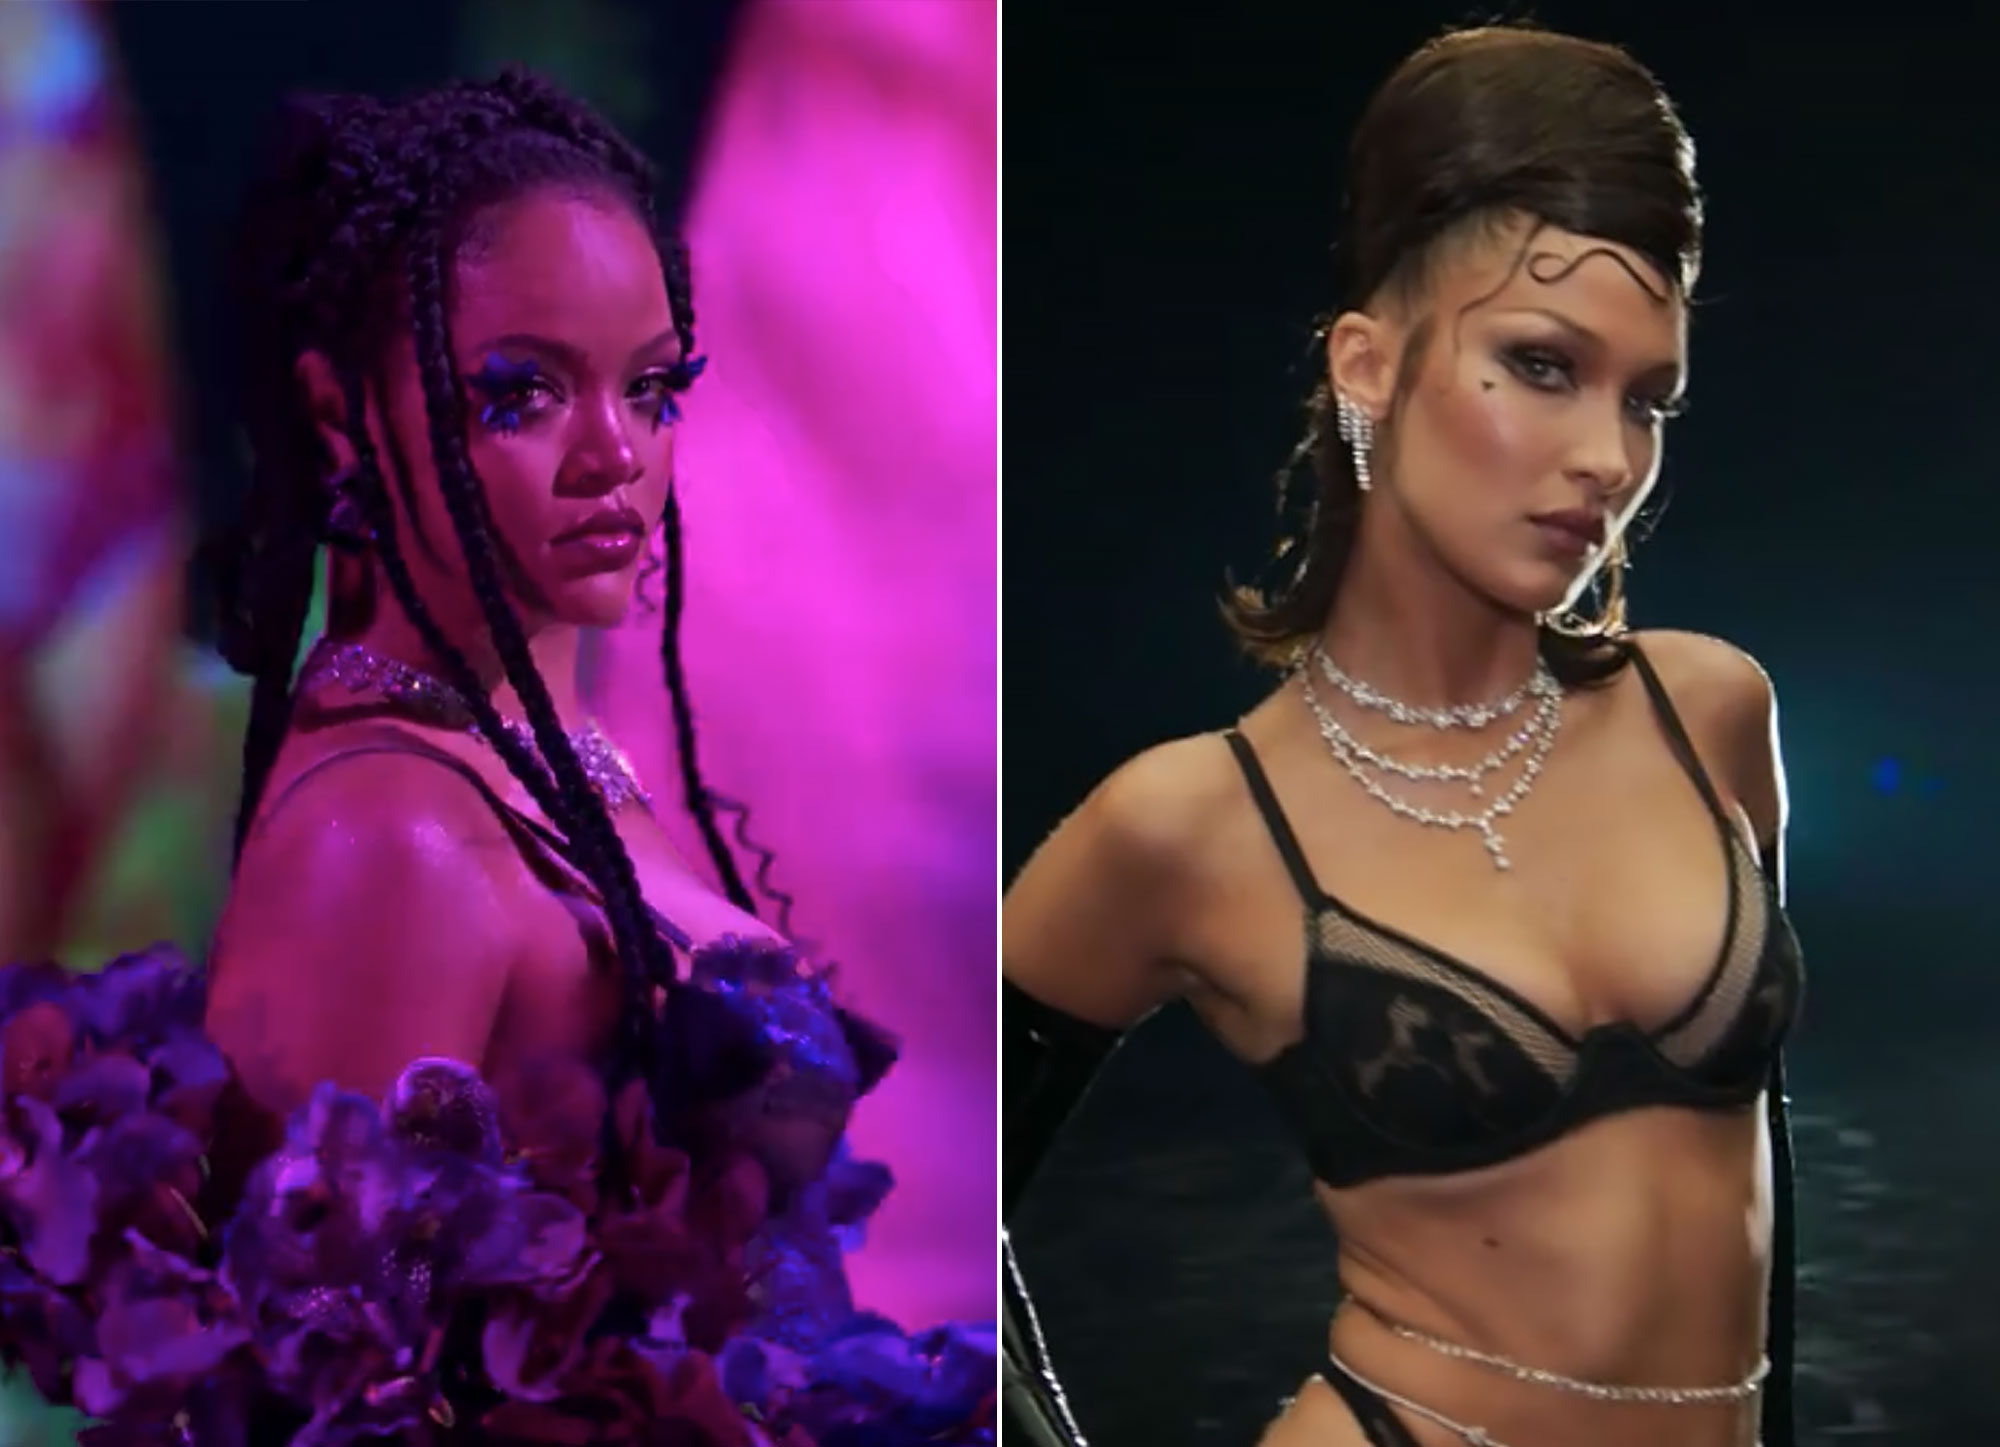 Rihanna's Lingerie Line Is Selling Different Styles Based on Body Type